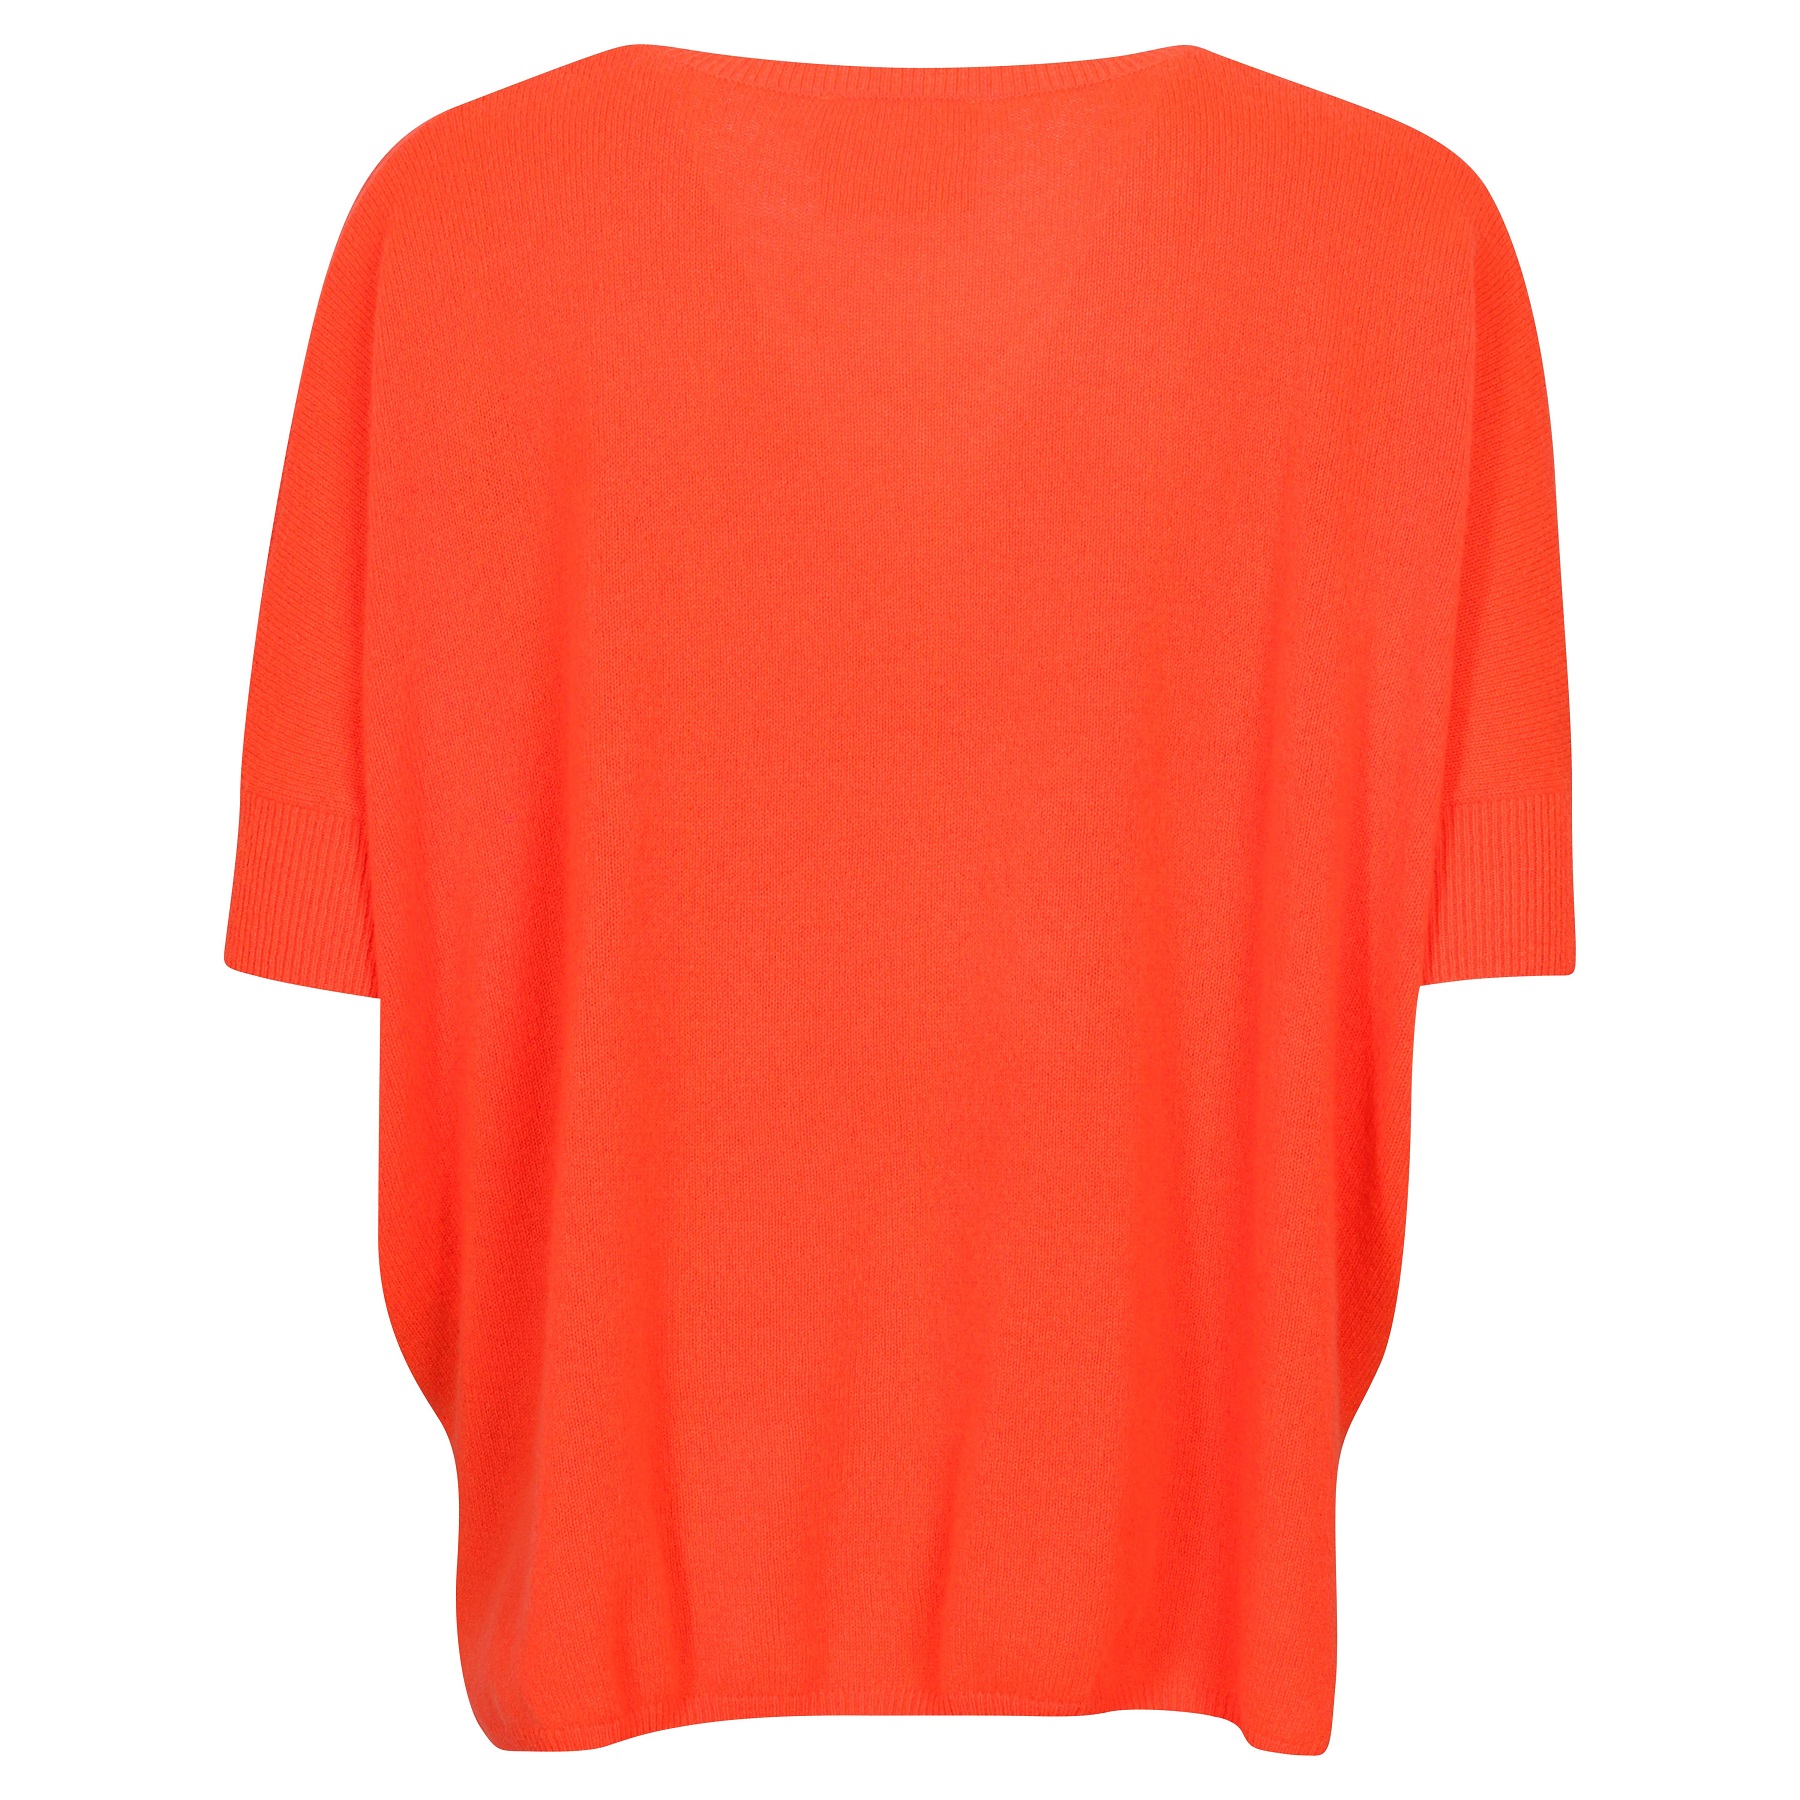 Absolut Cashmere Poncho Kate in Corail Fluo L